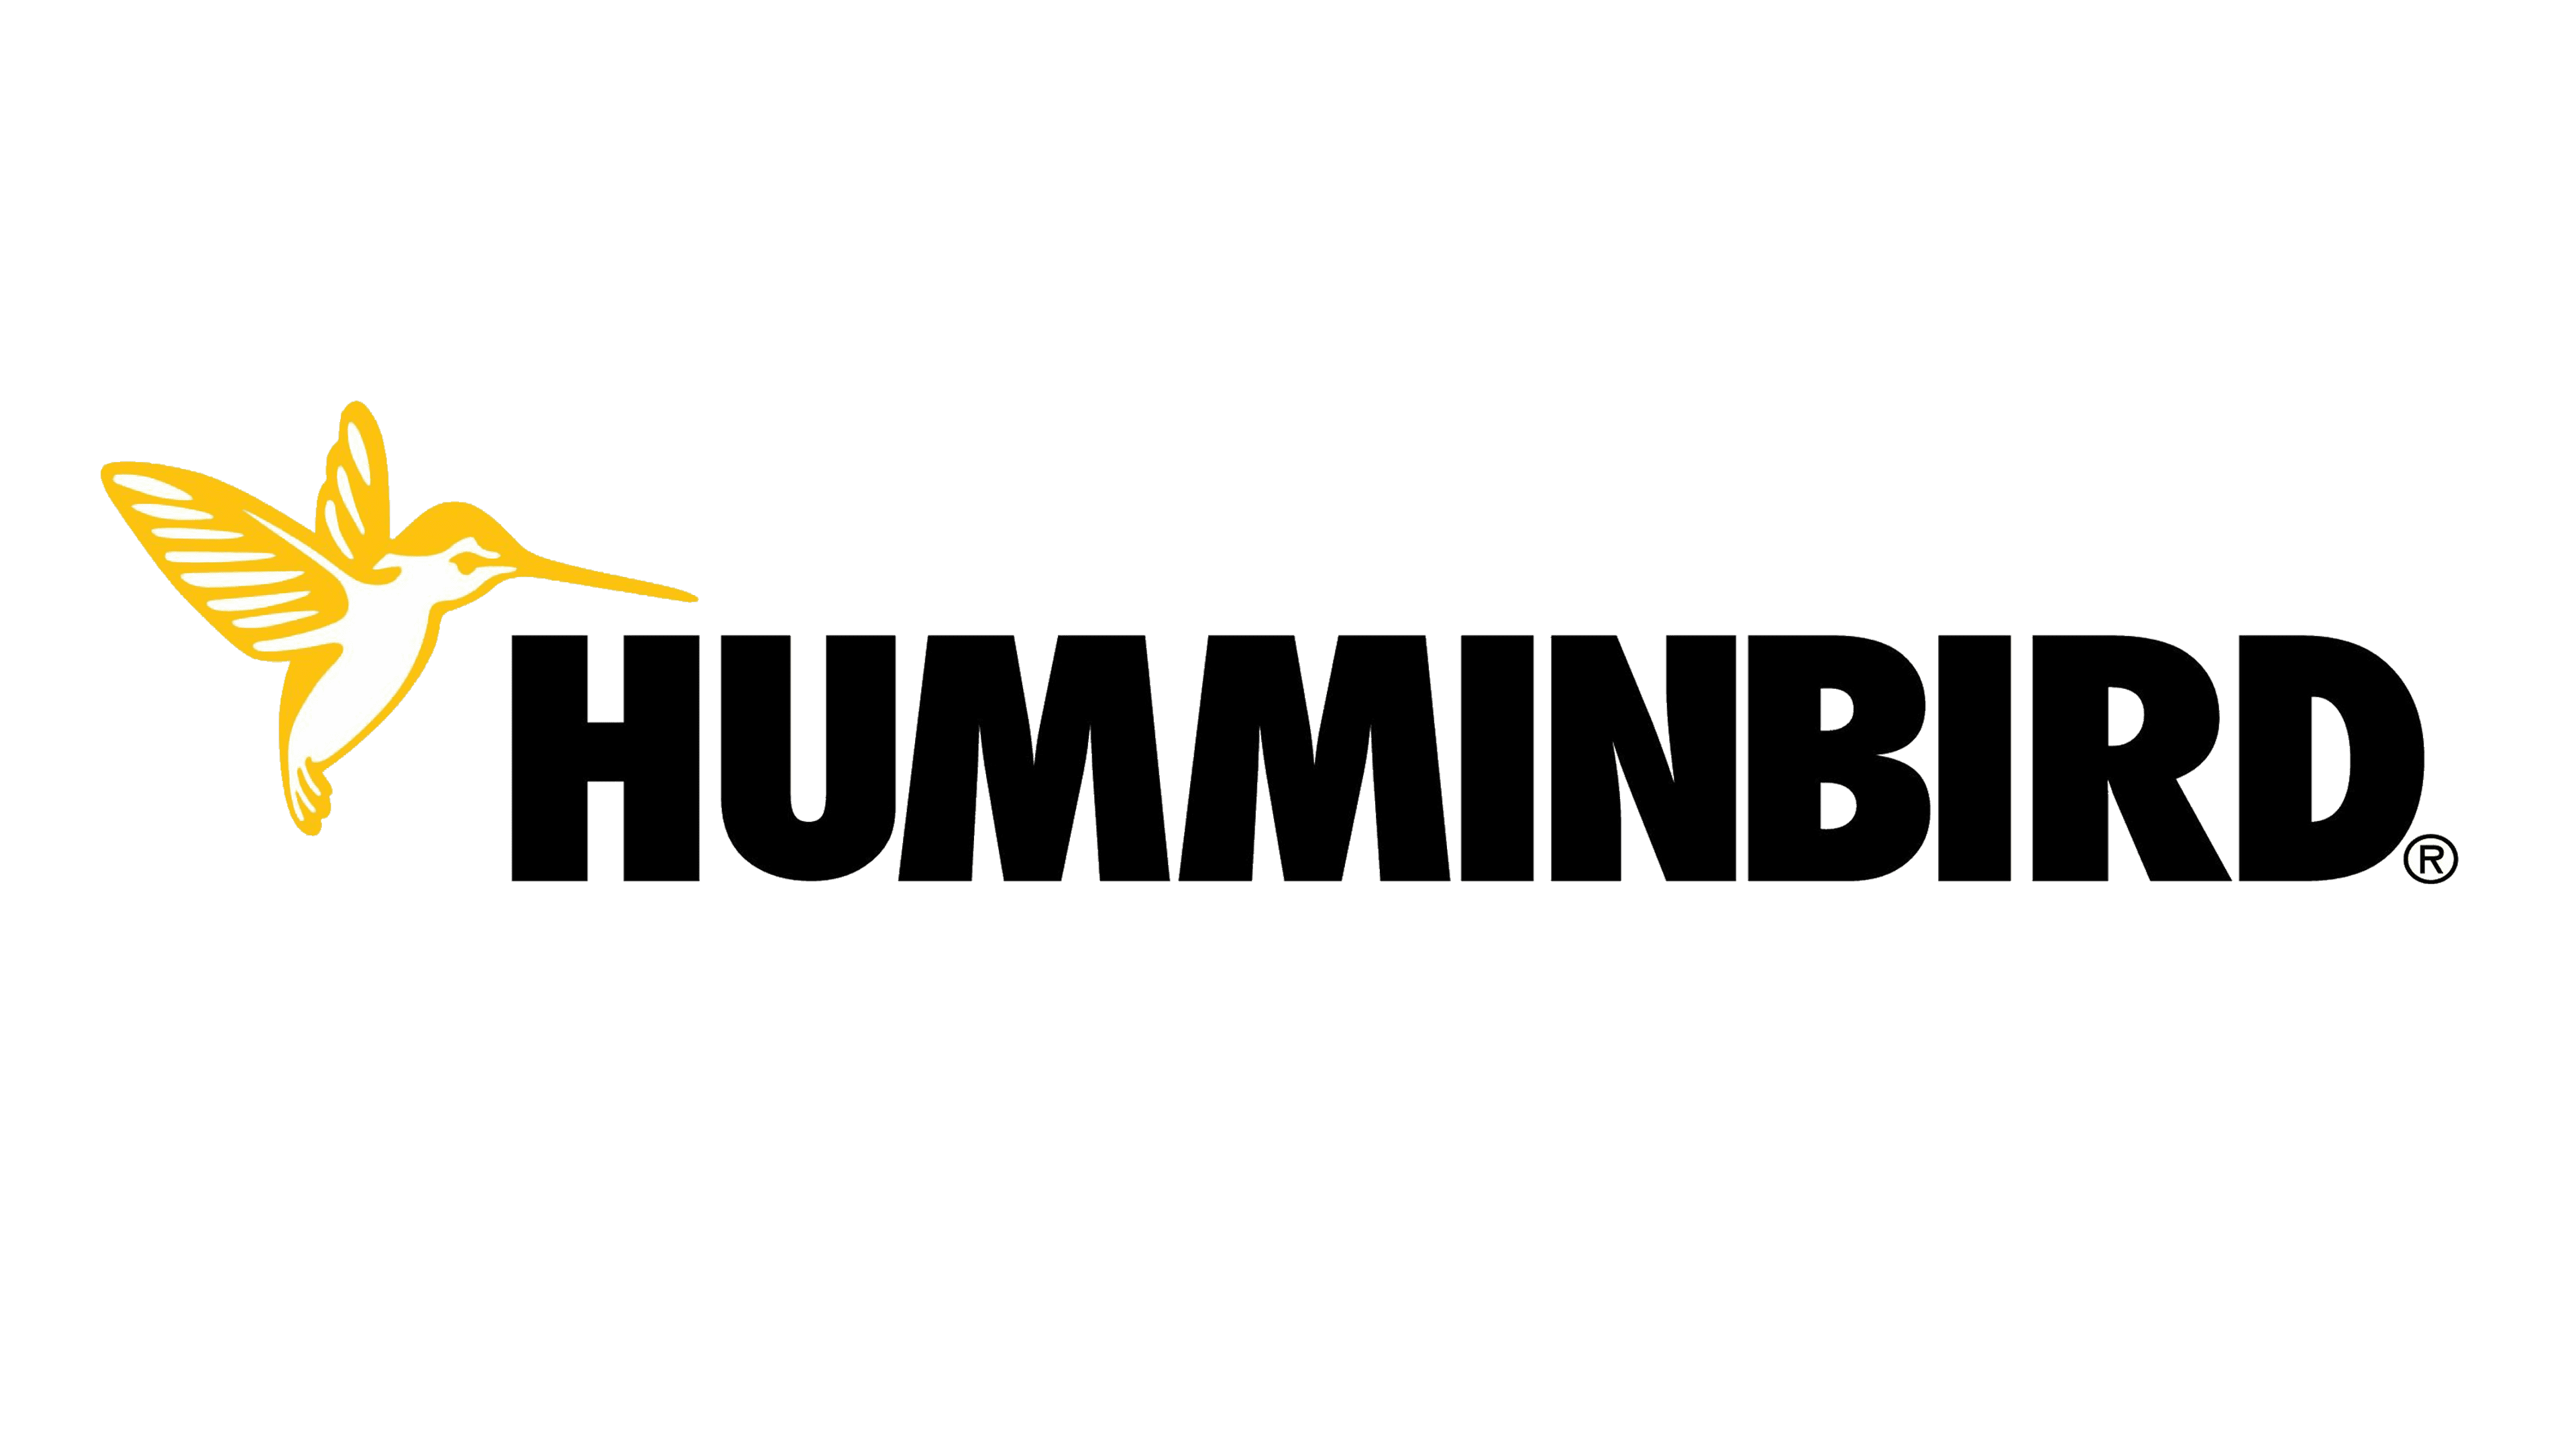 Humminbird Looks To Capture Share Of Gowing Live-Sonar Market